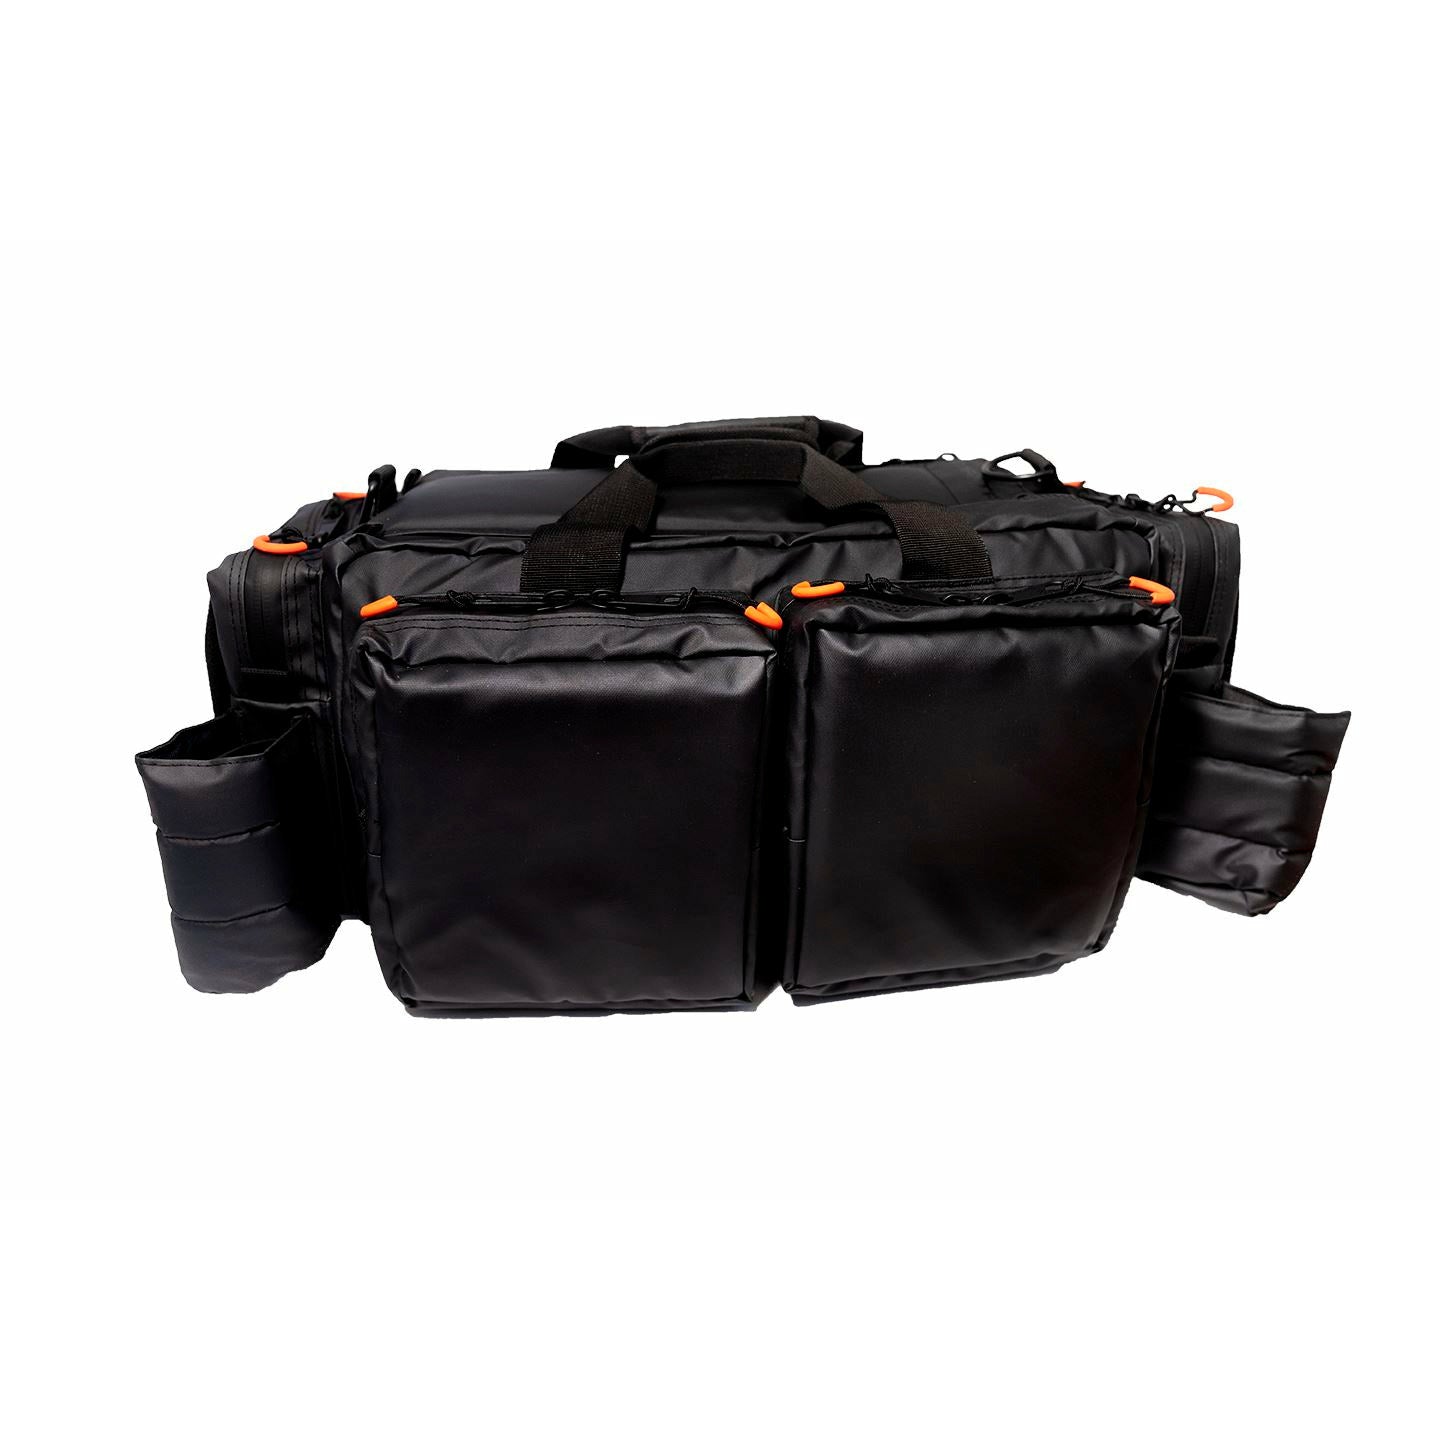 Amazon.com: Rhino USA Heavy Duty Recovery Gear Storage Bag - Ultimate Recovery  Kit Equipment Bag For Off-Road Gear and 4x4 Accessories - Fits Tow Straps,  Shackles, Snatch Block, and UTV Accessories (Camouflage) :